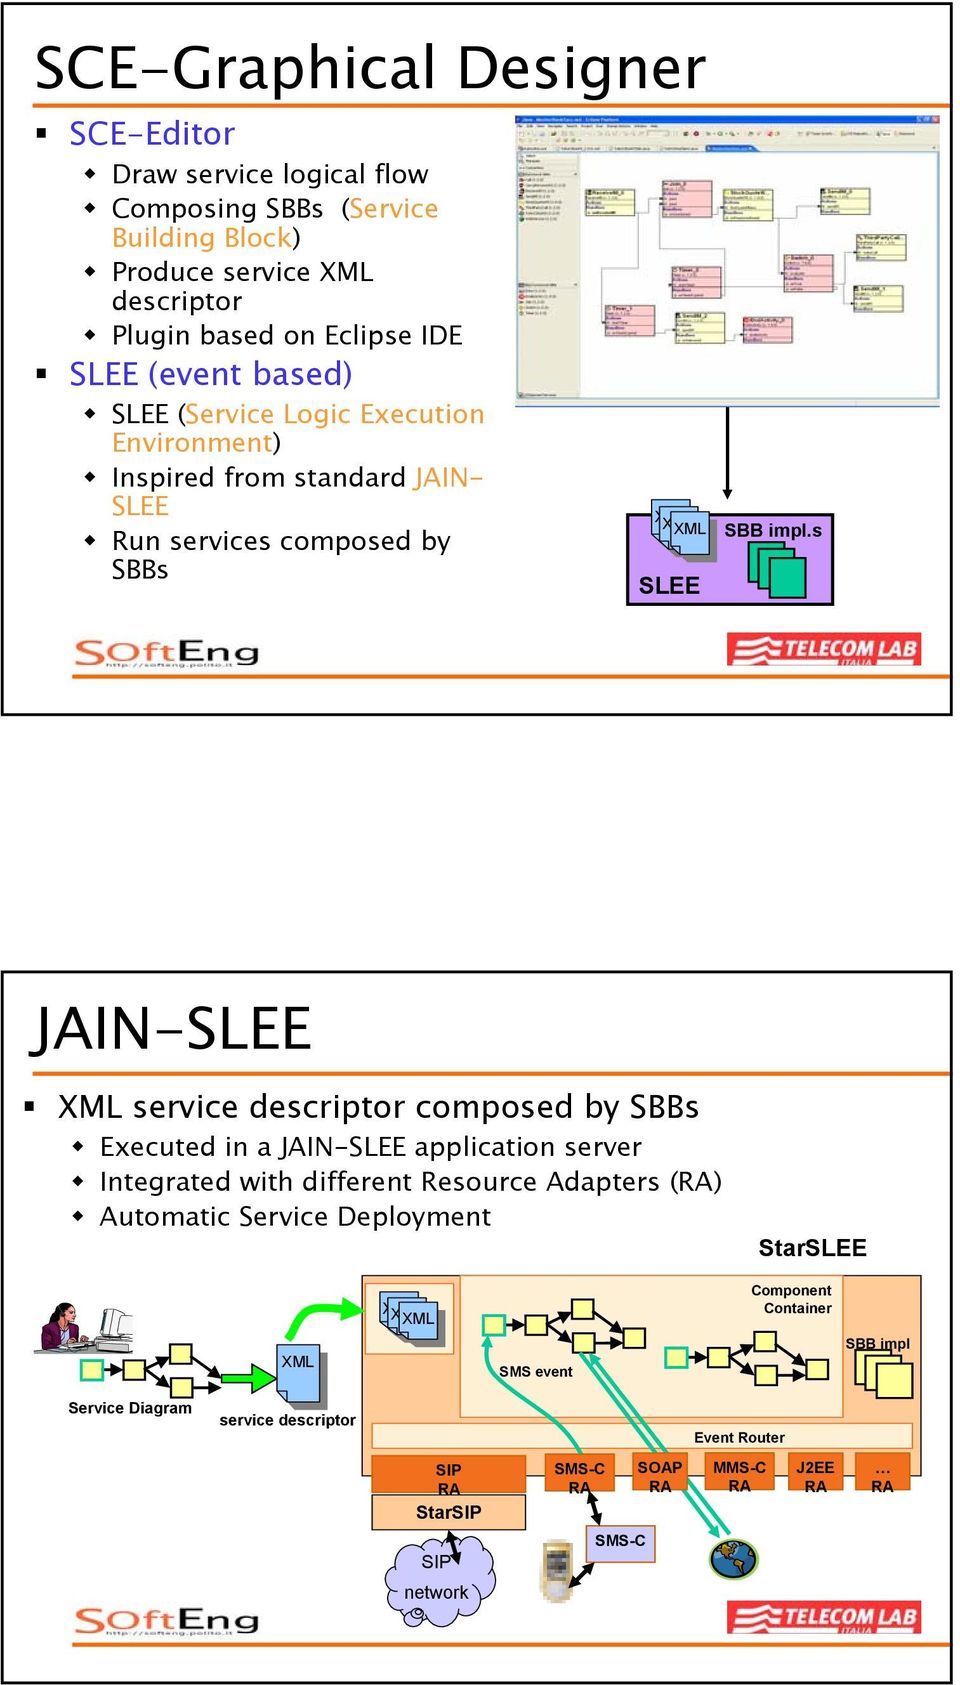 s SLEE JAIN-SLEE XML service descriptor composed by SBBs Executed in a JAIN-SLEE application server Integrated with different Resource Adapters (RA) Automatic Service